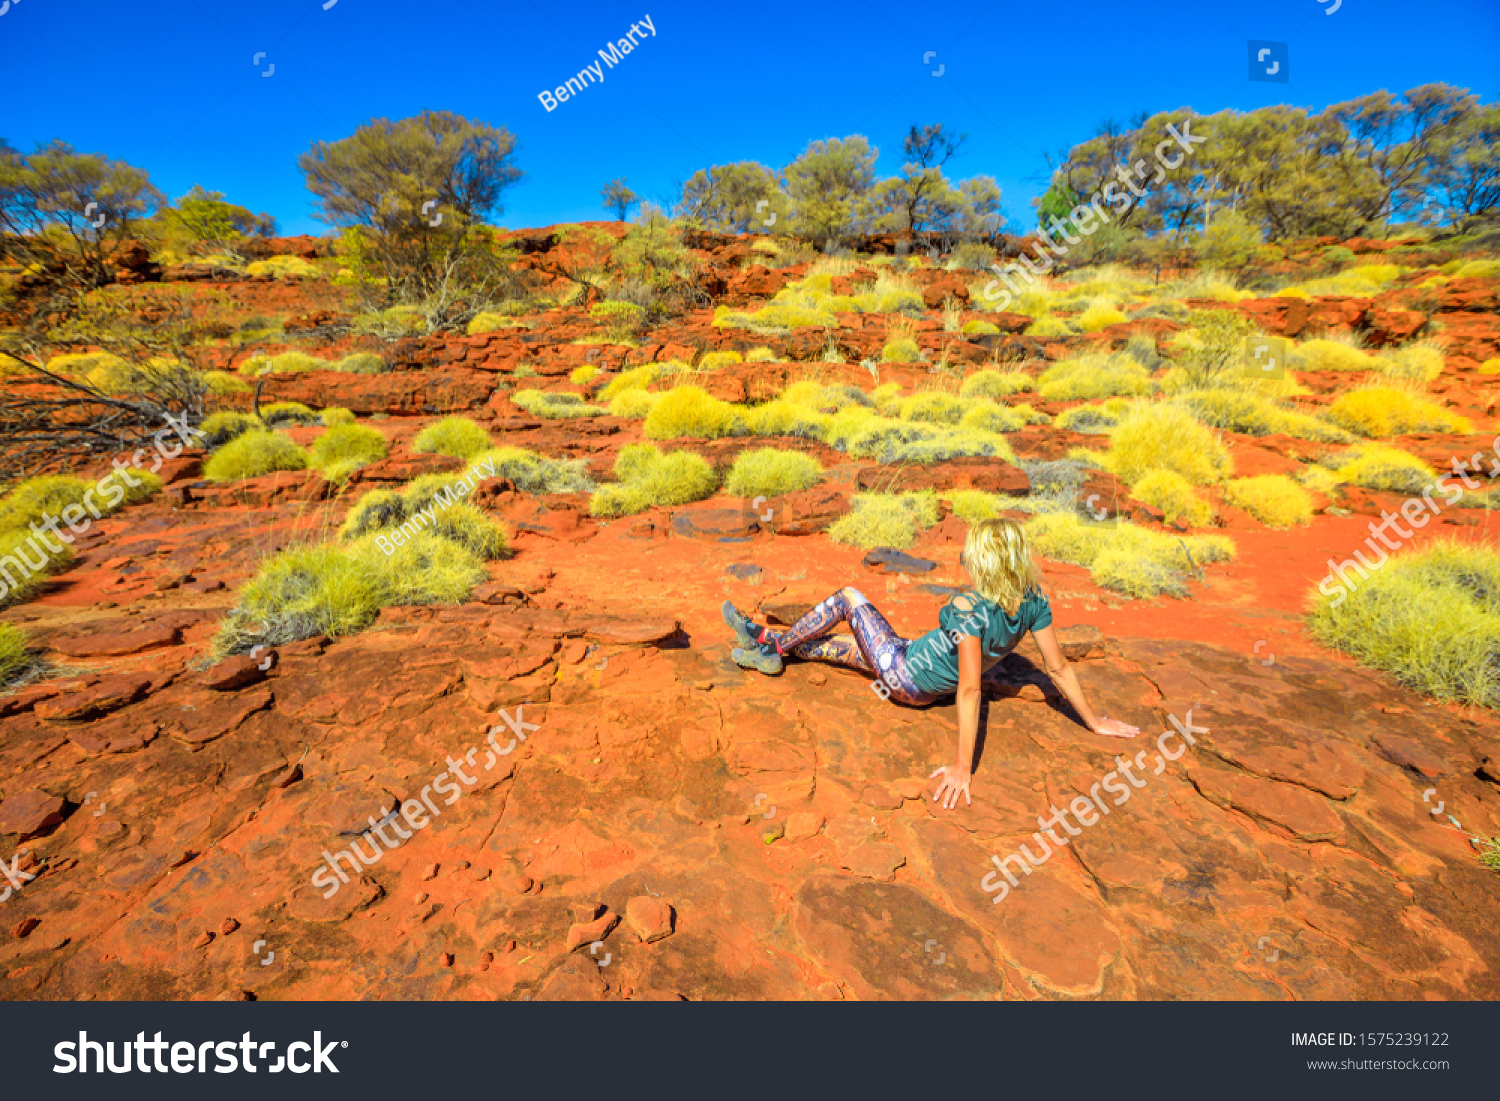 Tourist woman relaxing during the hiking along Arankaia Walk with bush vegetation and red desert sand in Palm Valley, Finke Gorge National Park. Tourism in Australia Outback, Northern Territory. #1575239122